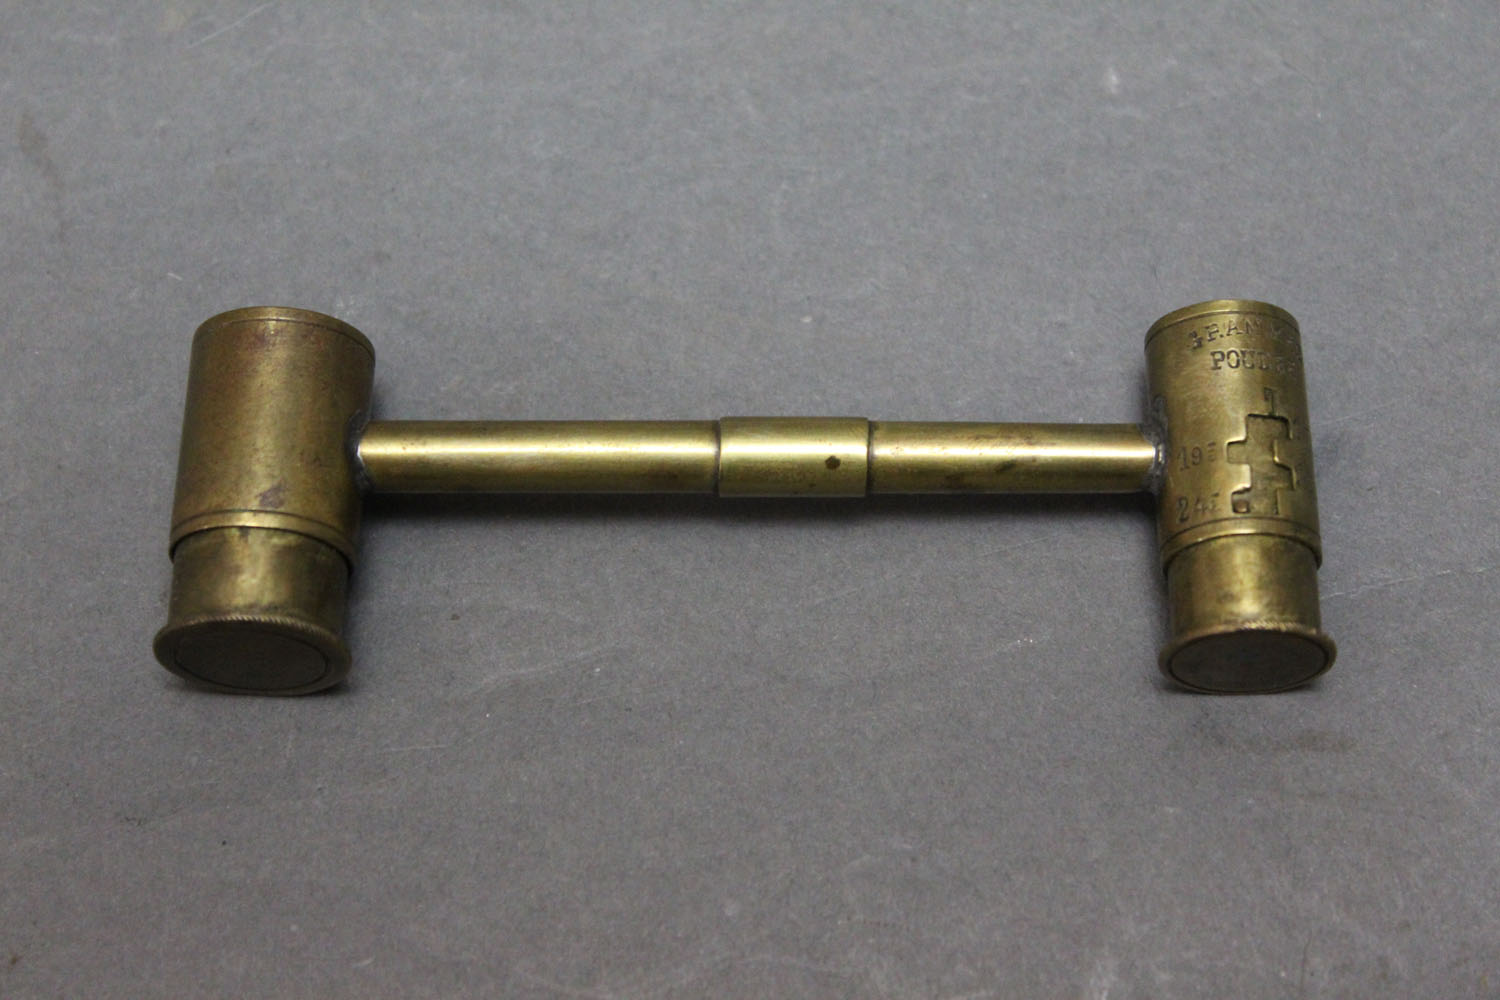 Double ended brass powder and shot measure. 10.5 cm.